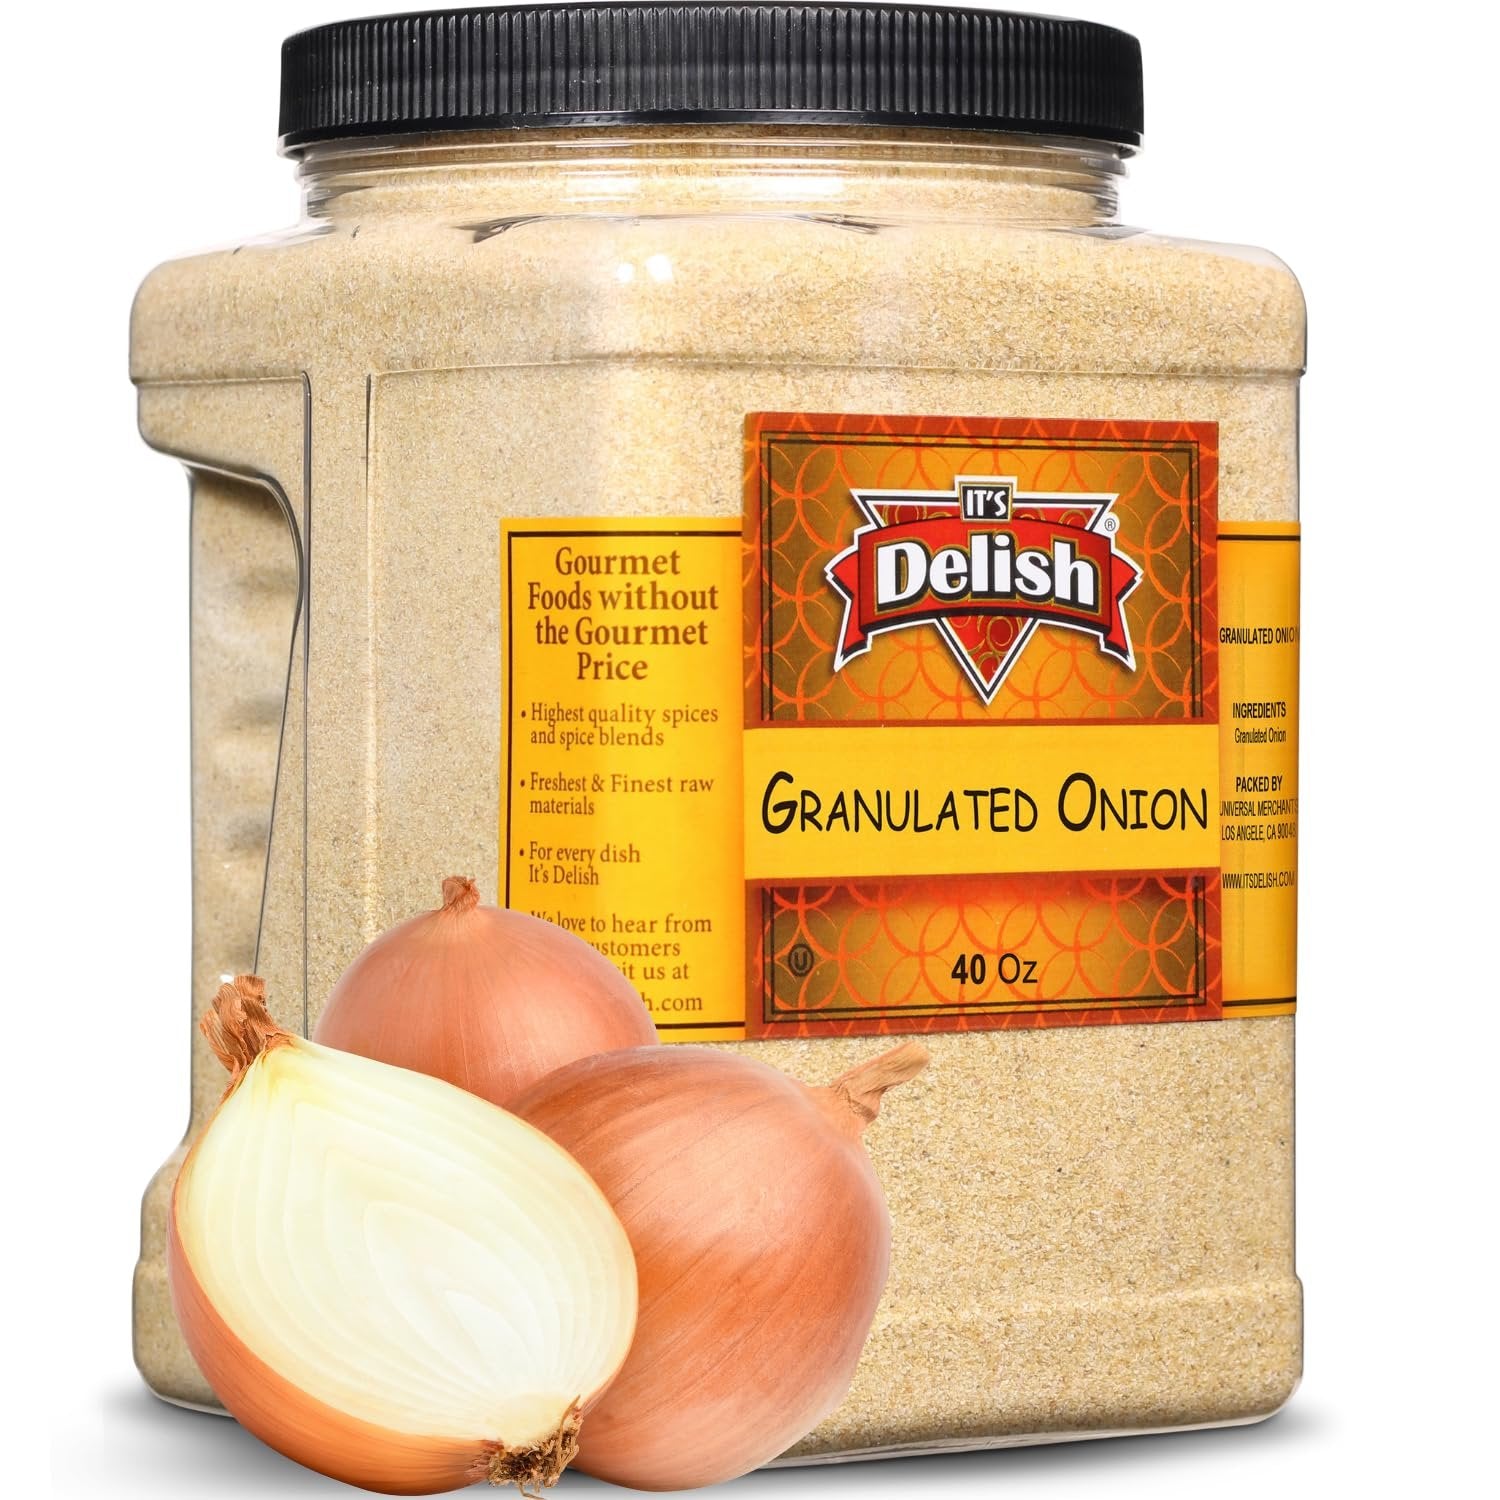 Gourmet Toasted Dried Minced Onion by Its Delish, 2.1 lbs 34 oz Jumbo Container Jar All Natural Dry Roasted Chopped Onion, No Preservatives, No